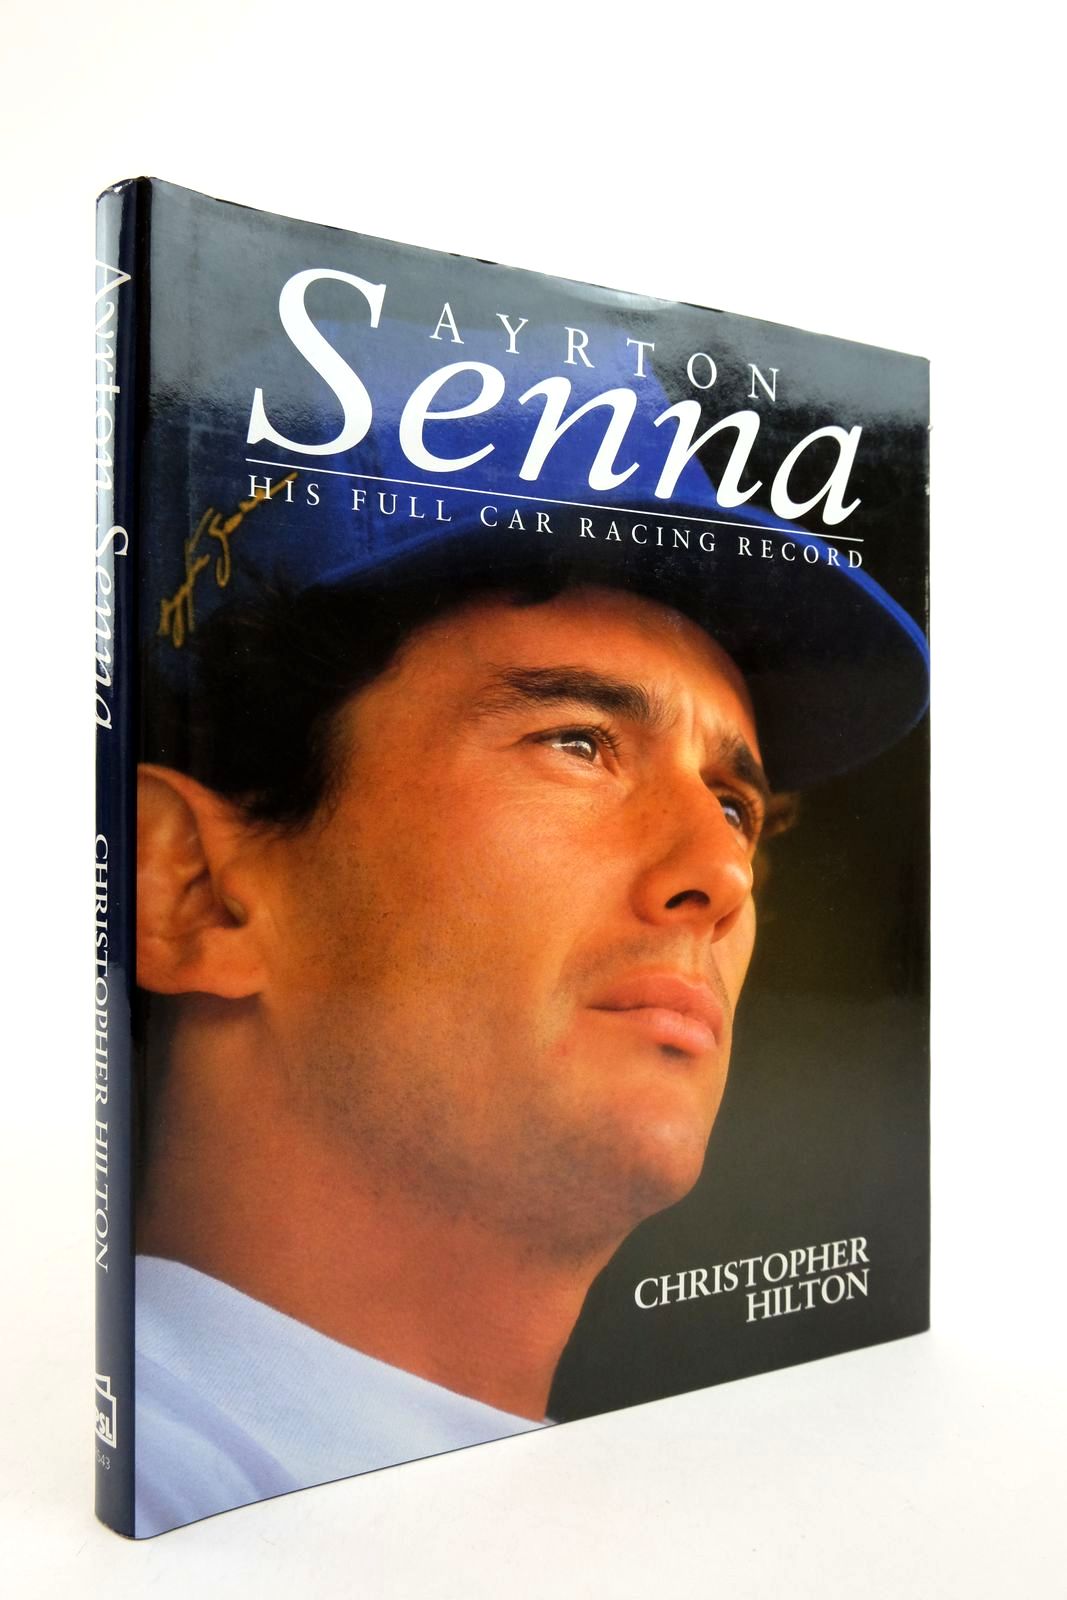 Photo of AYRTON SENNA: HIS FULL CAR RACING RECORD written by Hilton, Christopher published by Patrick Stephens Limited (STOCK CODE: 2139924)  for sale by Stella & Rose's Books